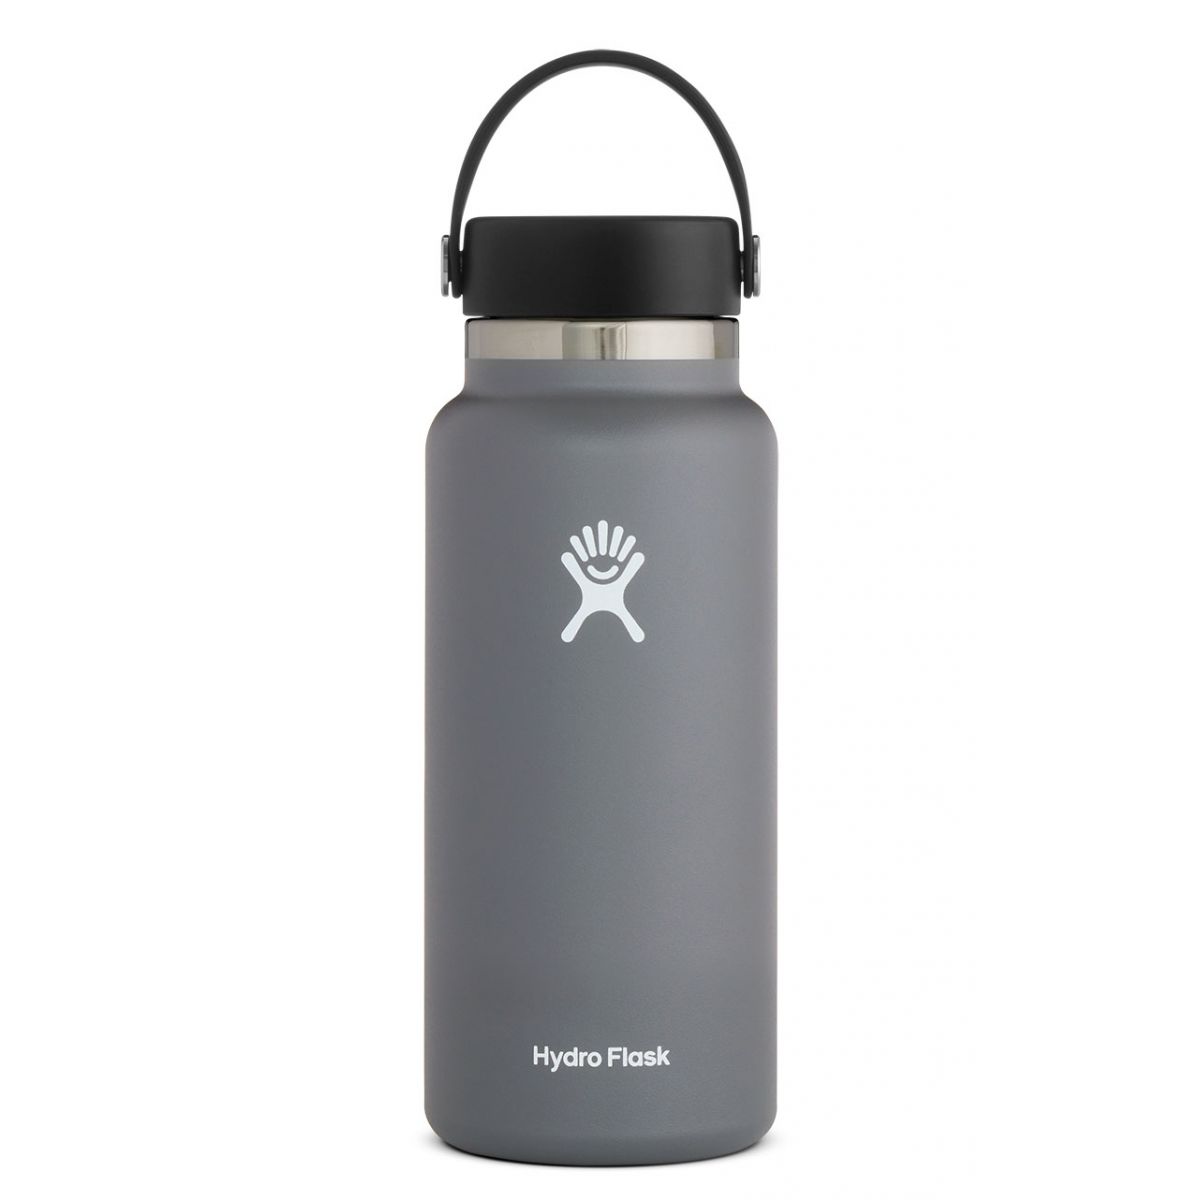 Hydro Flask 32oz / 946ml Wide Mouth